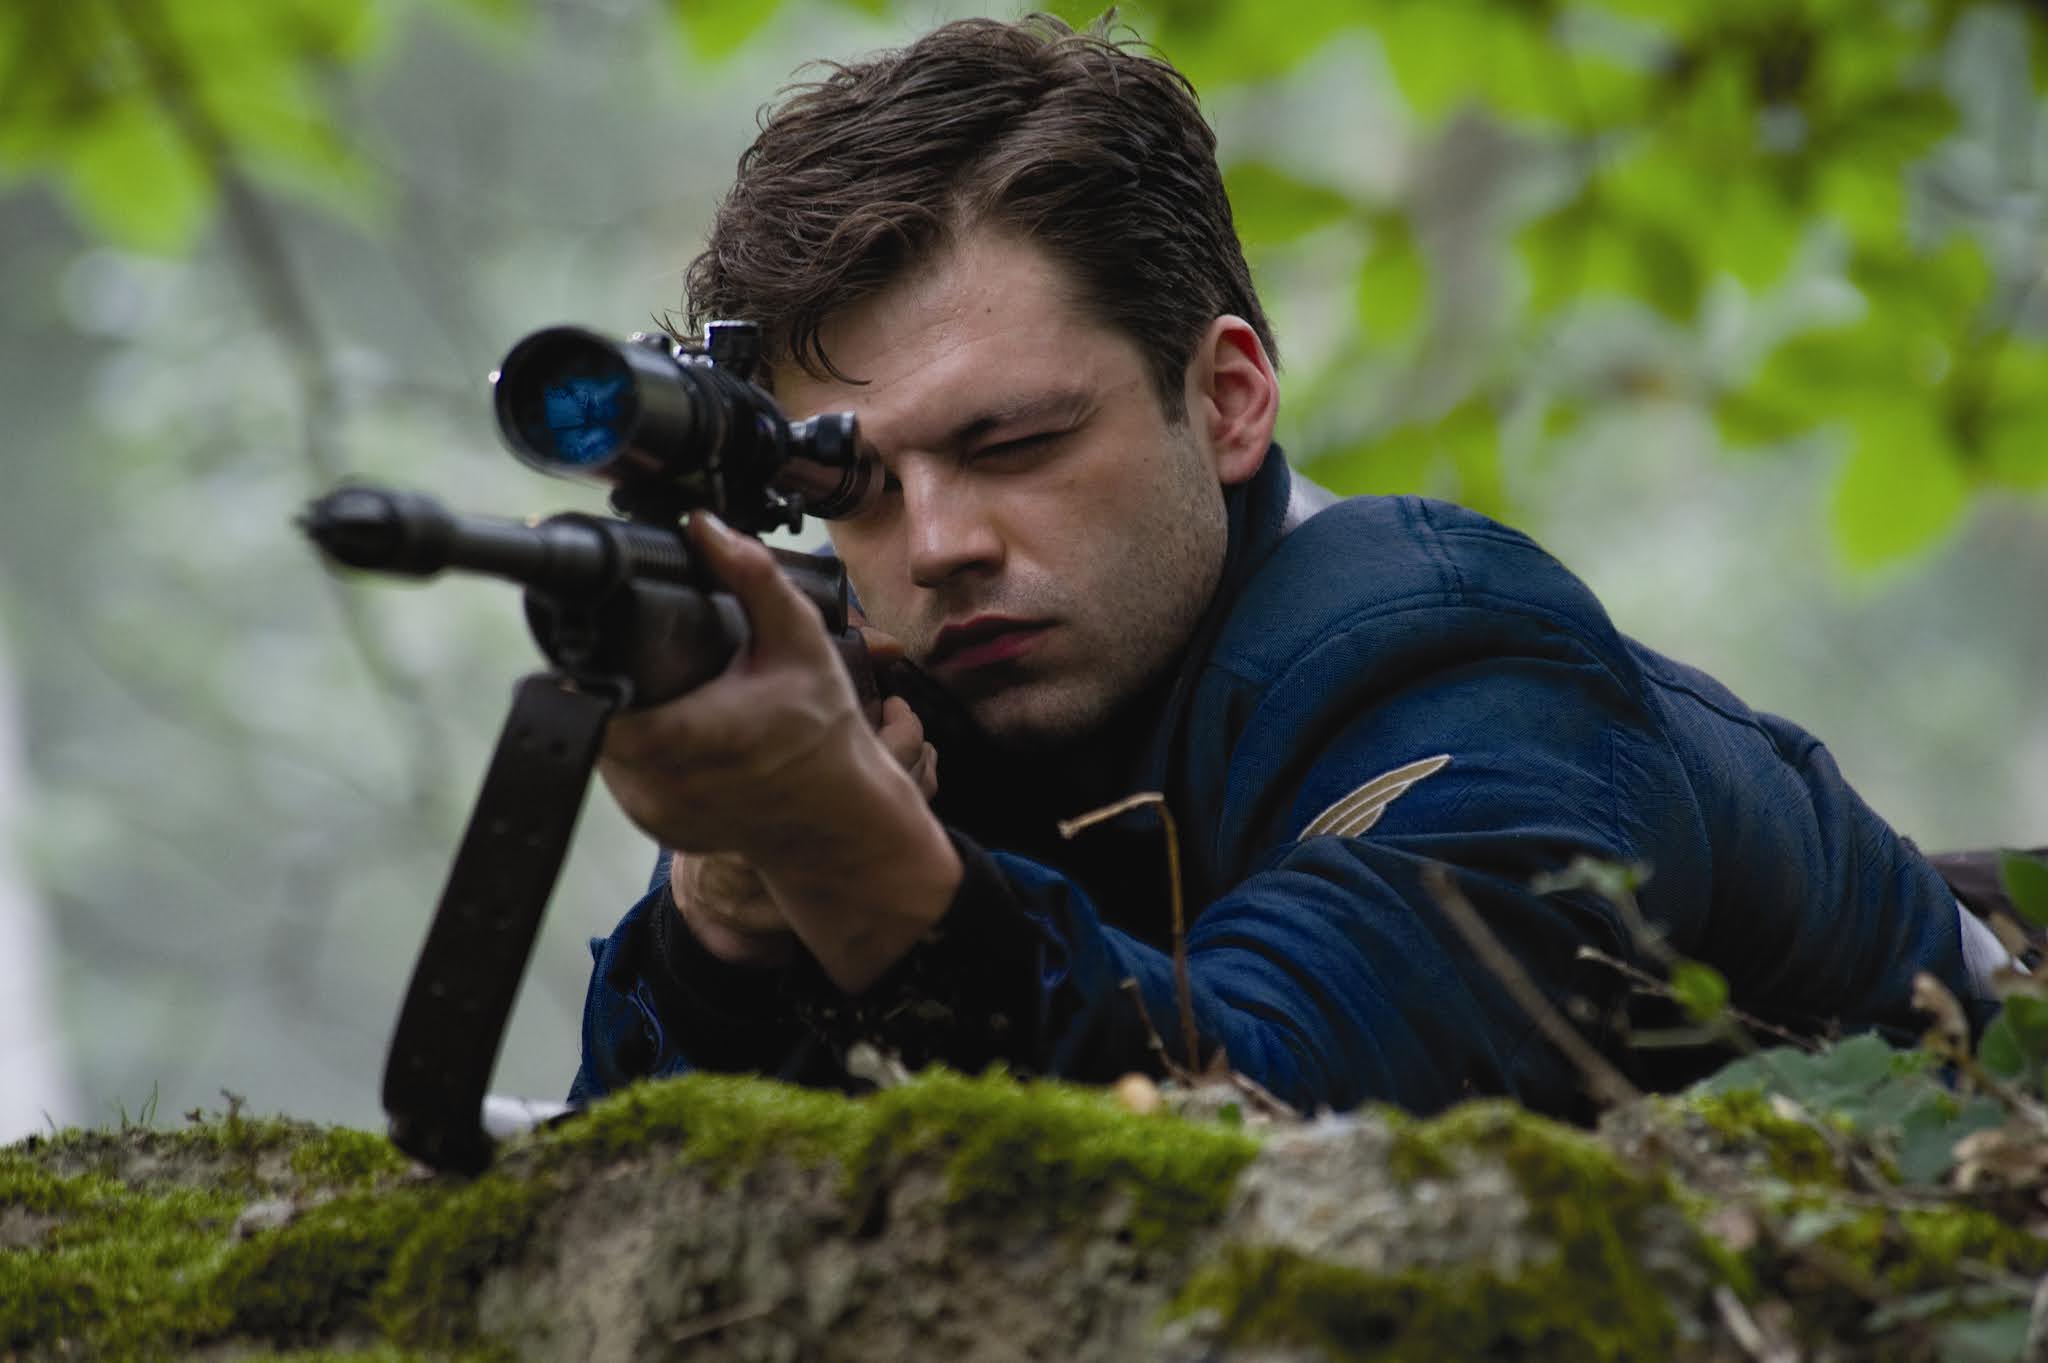 Bucky Barnes/winter soldiers  takes aim with his sniper rifle